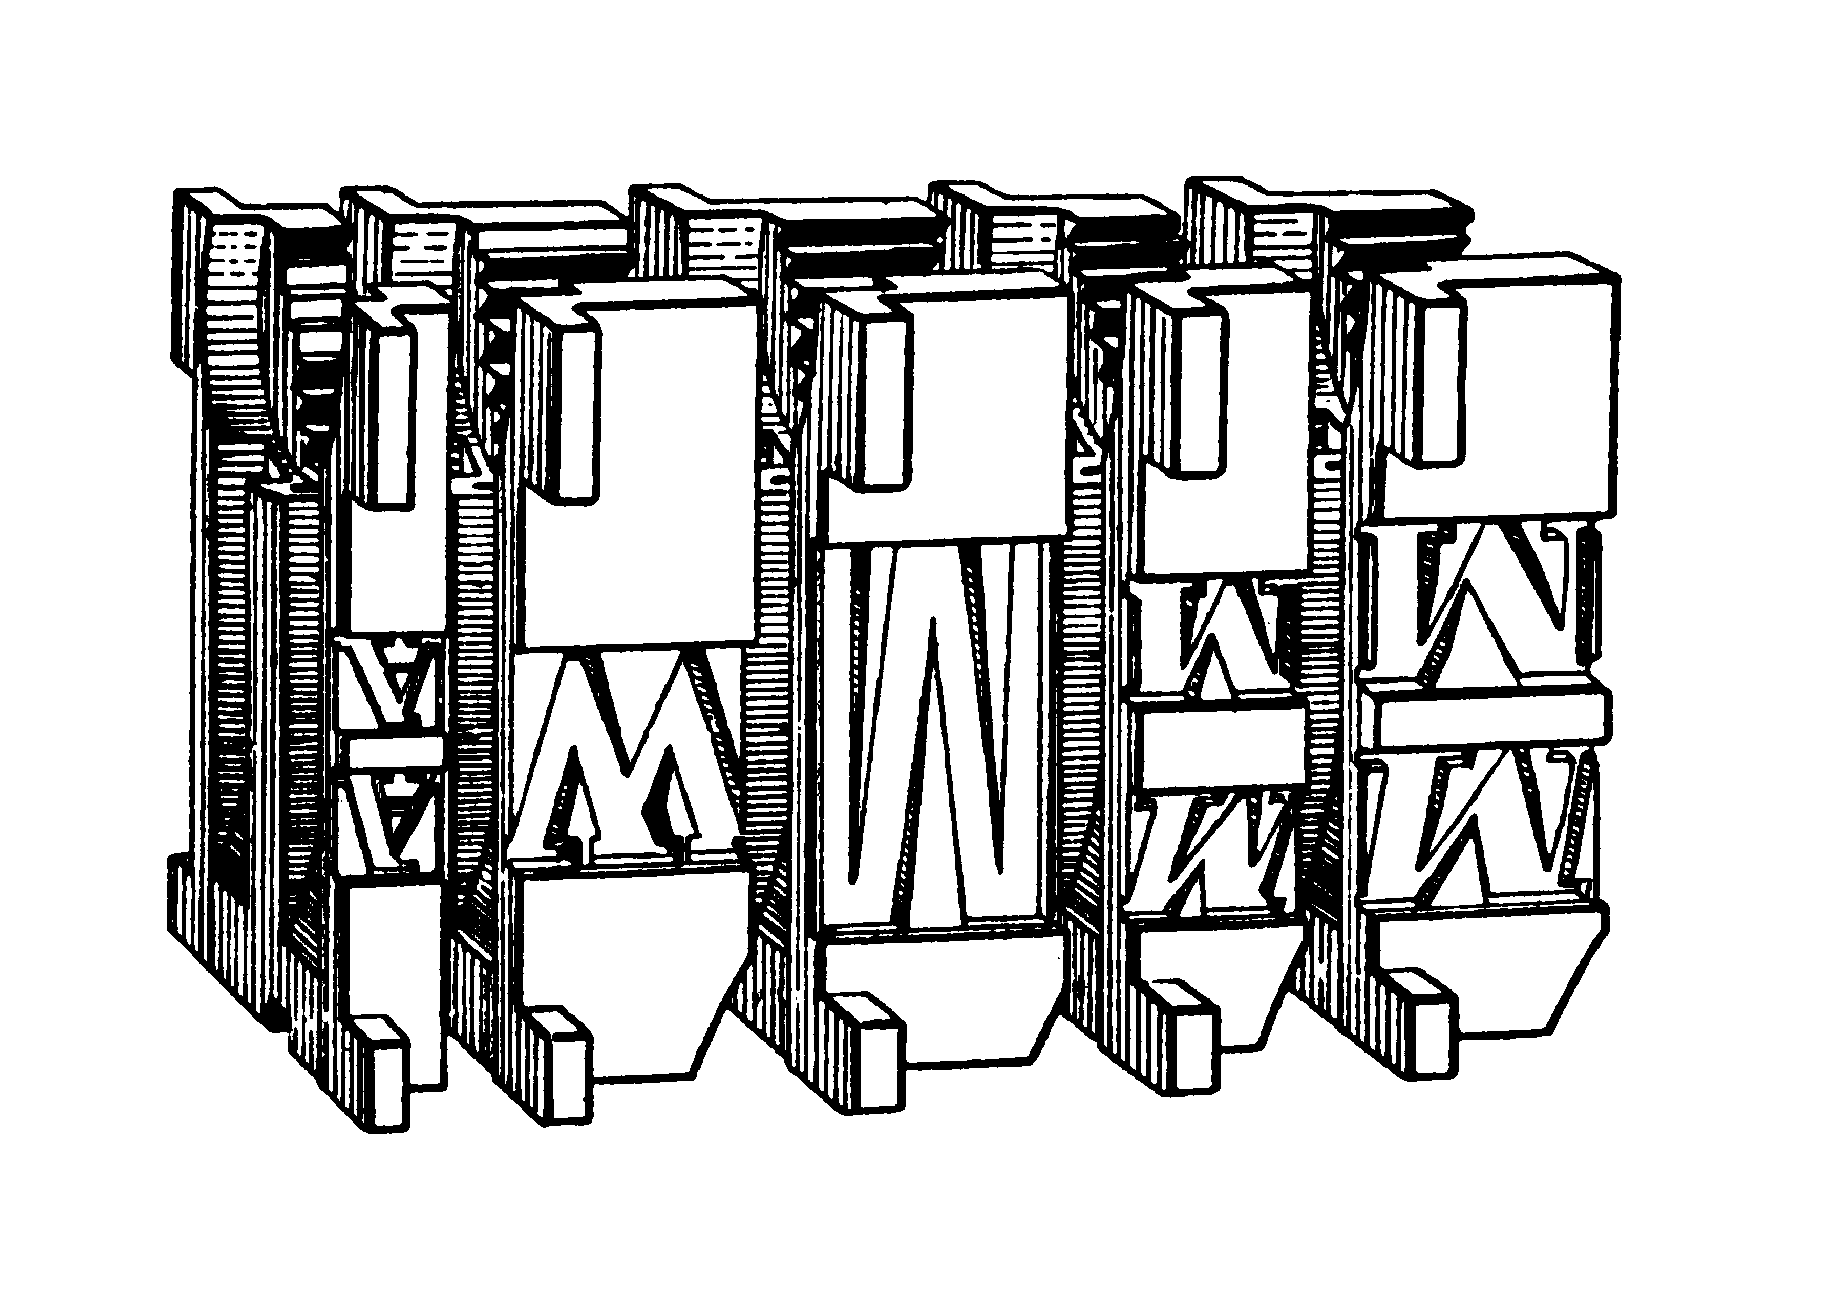 Line drawing of several matrices